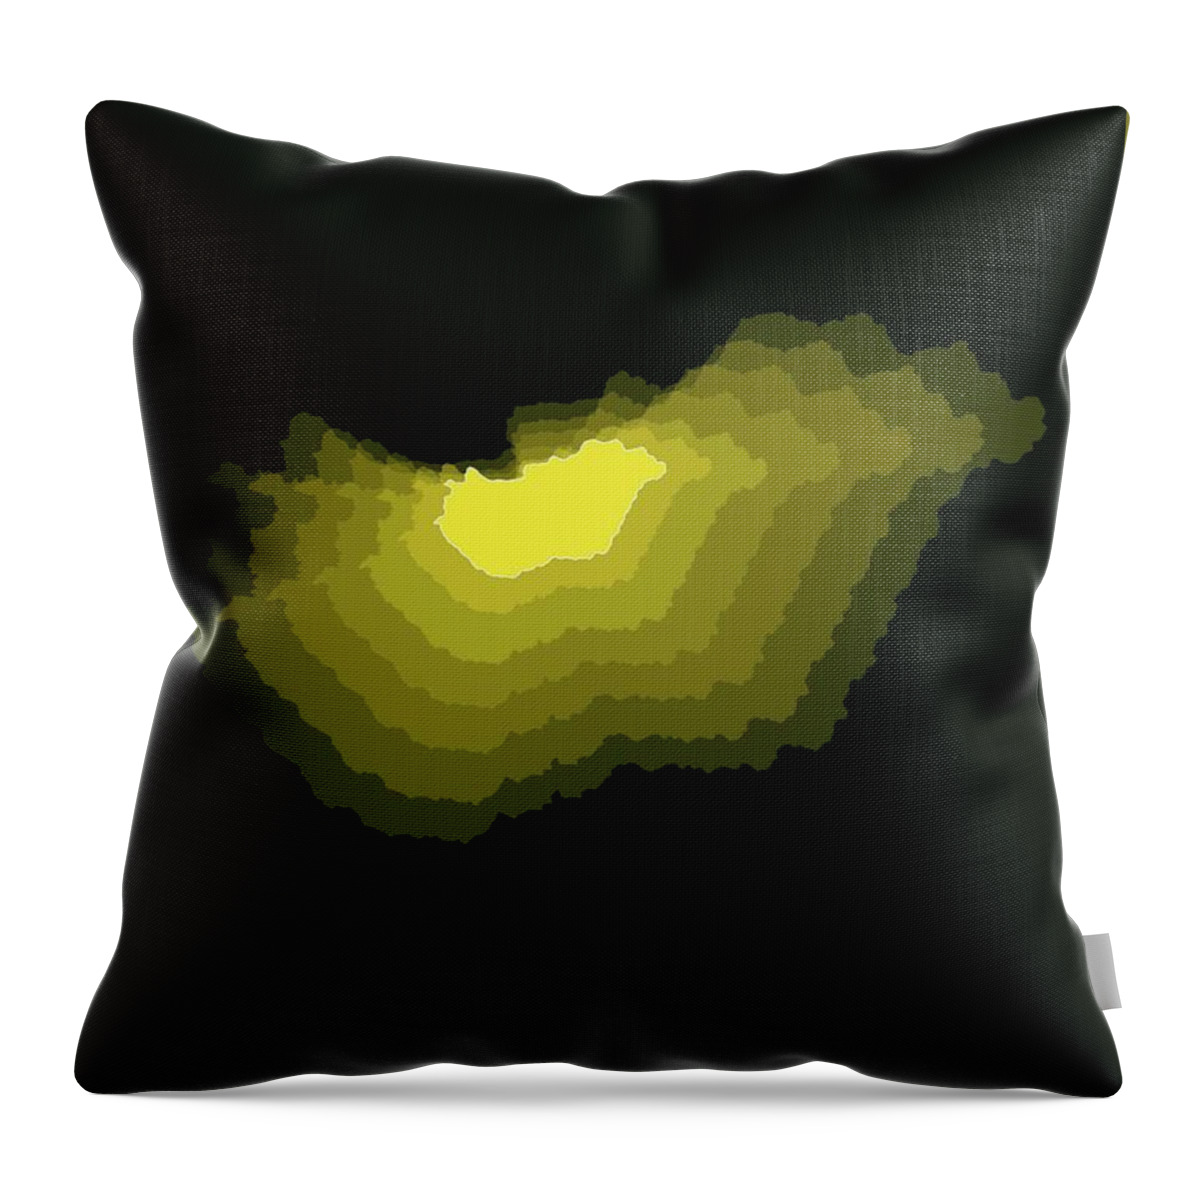  Throw Pillow featuring the digital art Hungary Radiant Map II by Naxart Studio